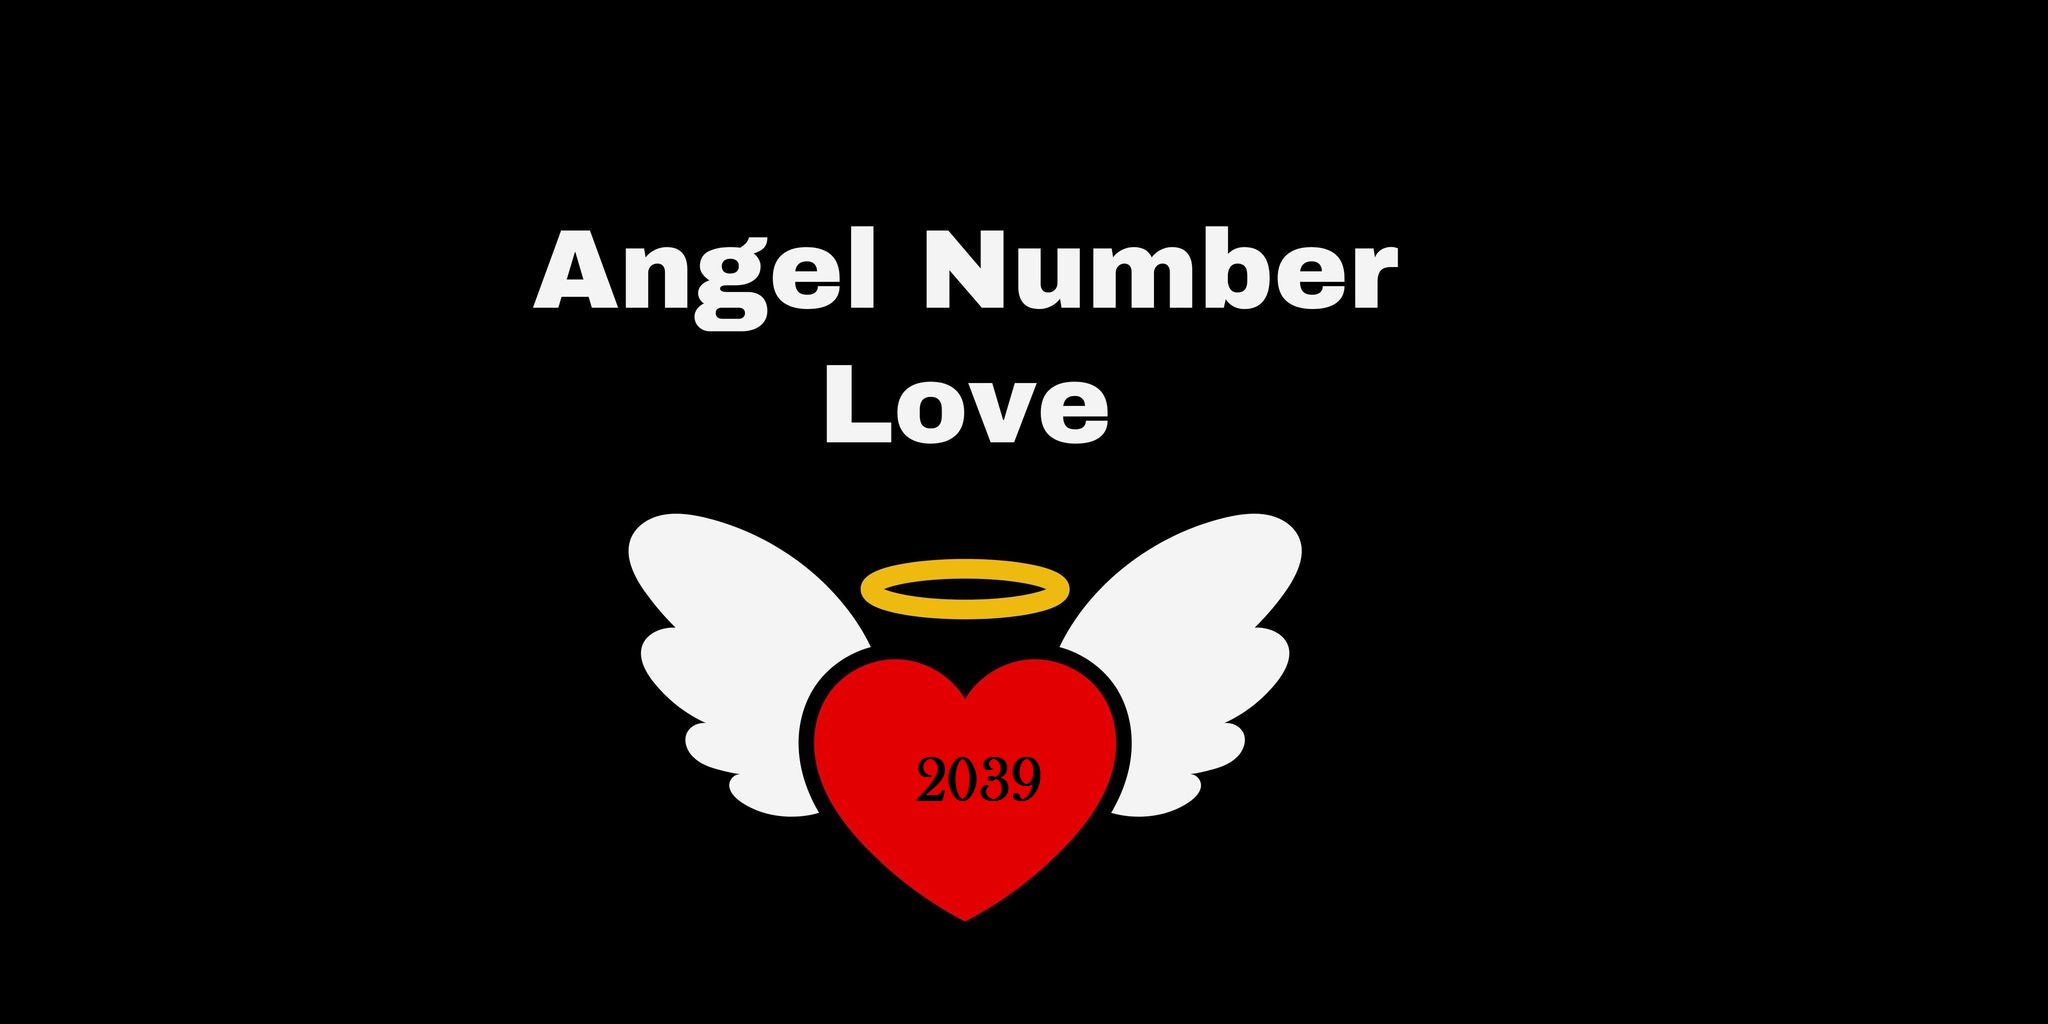 2039 Angel Number Meaning In Love